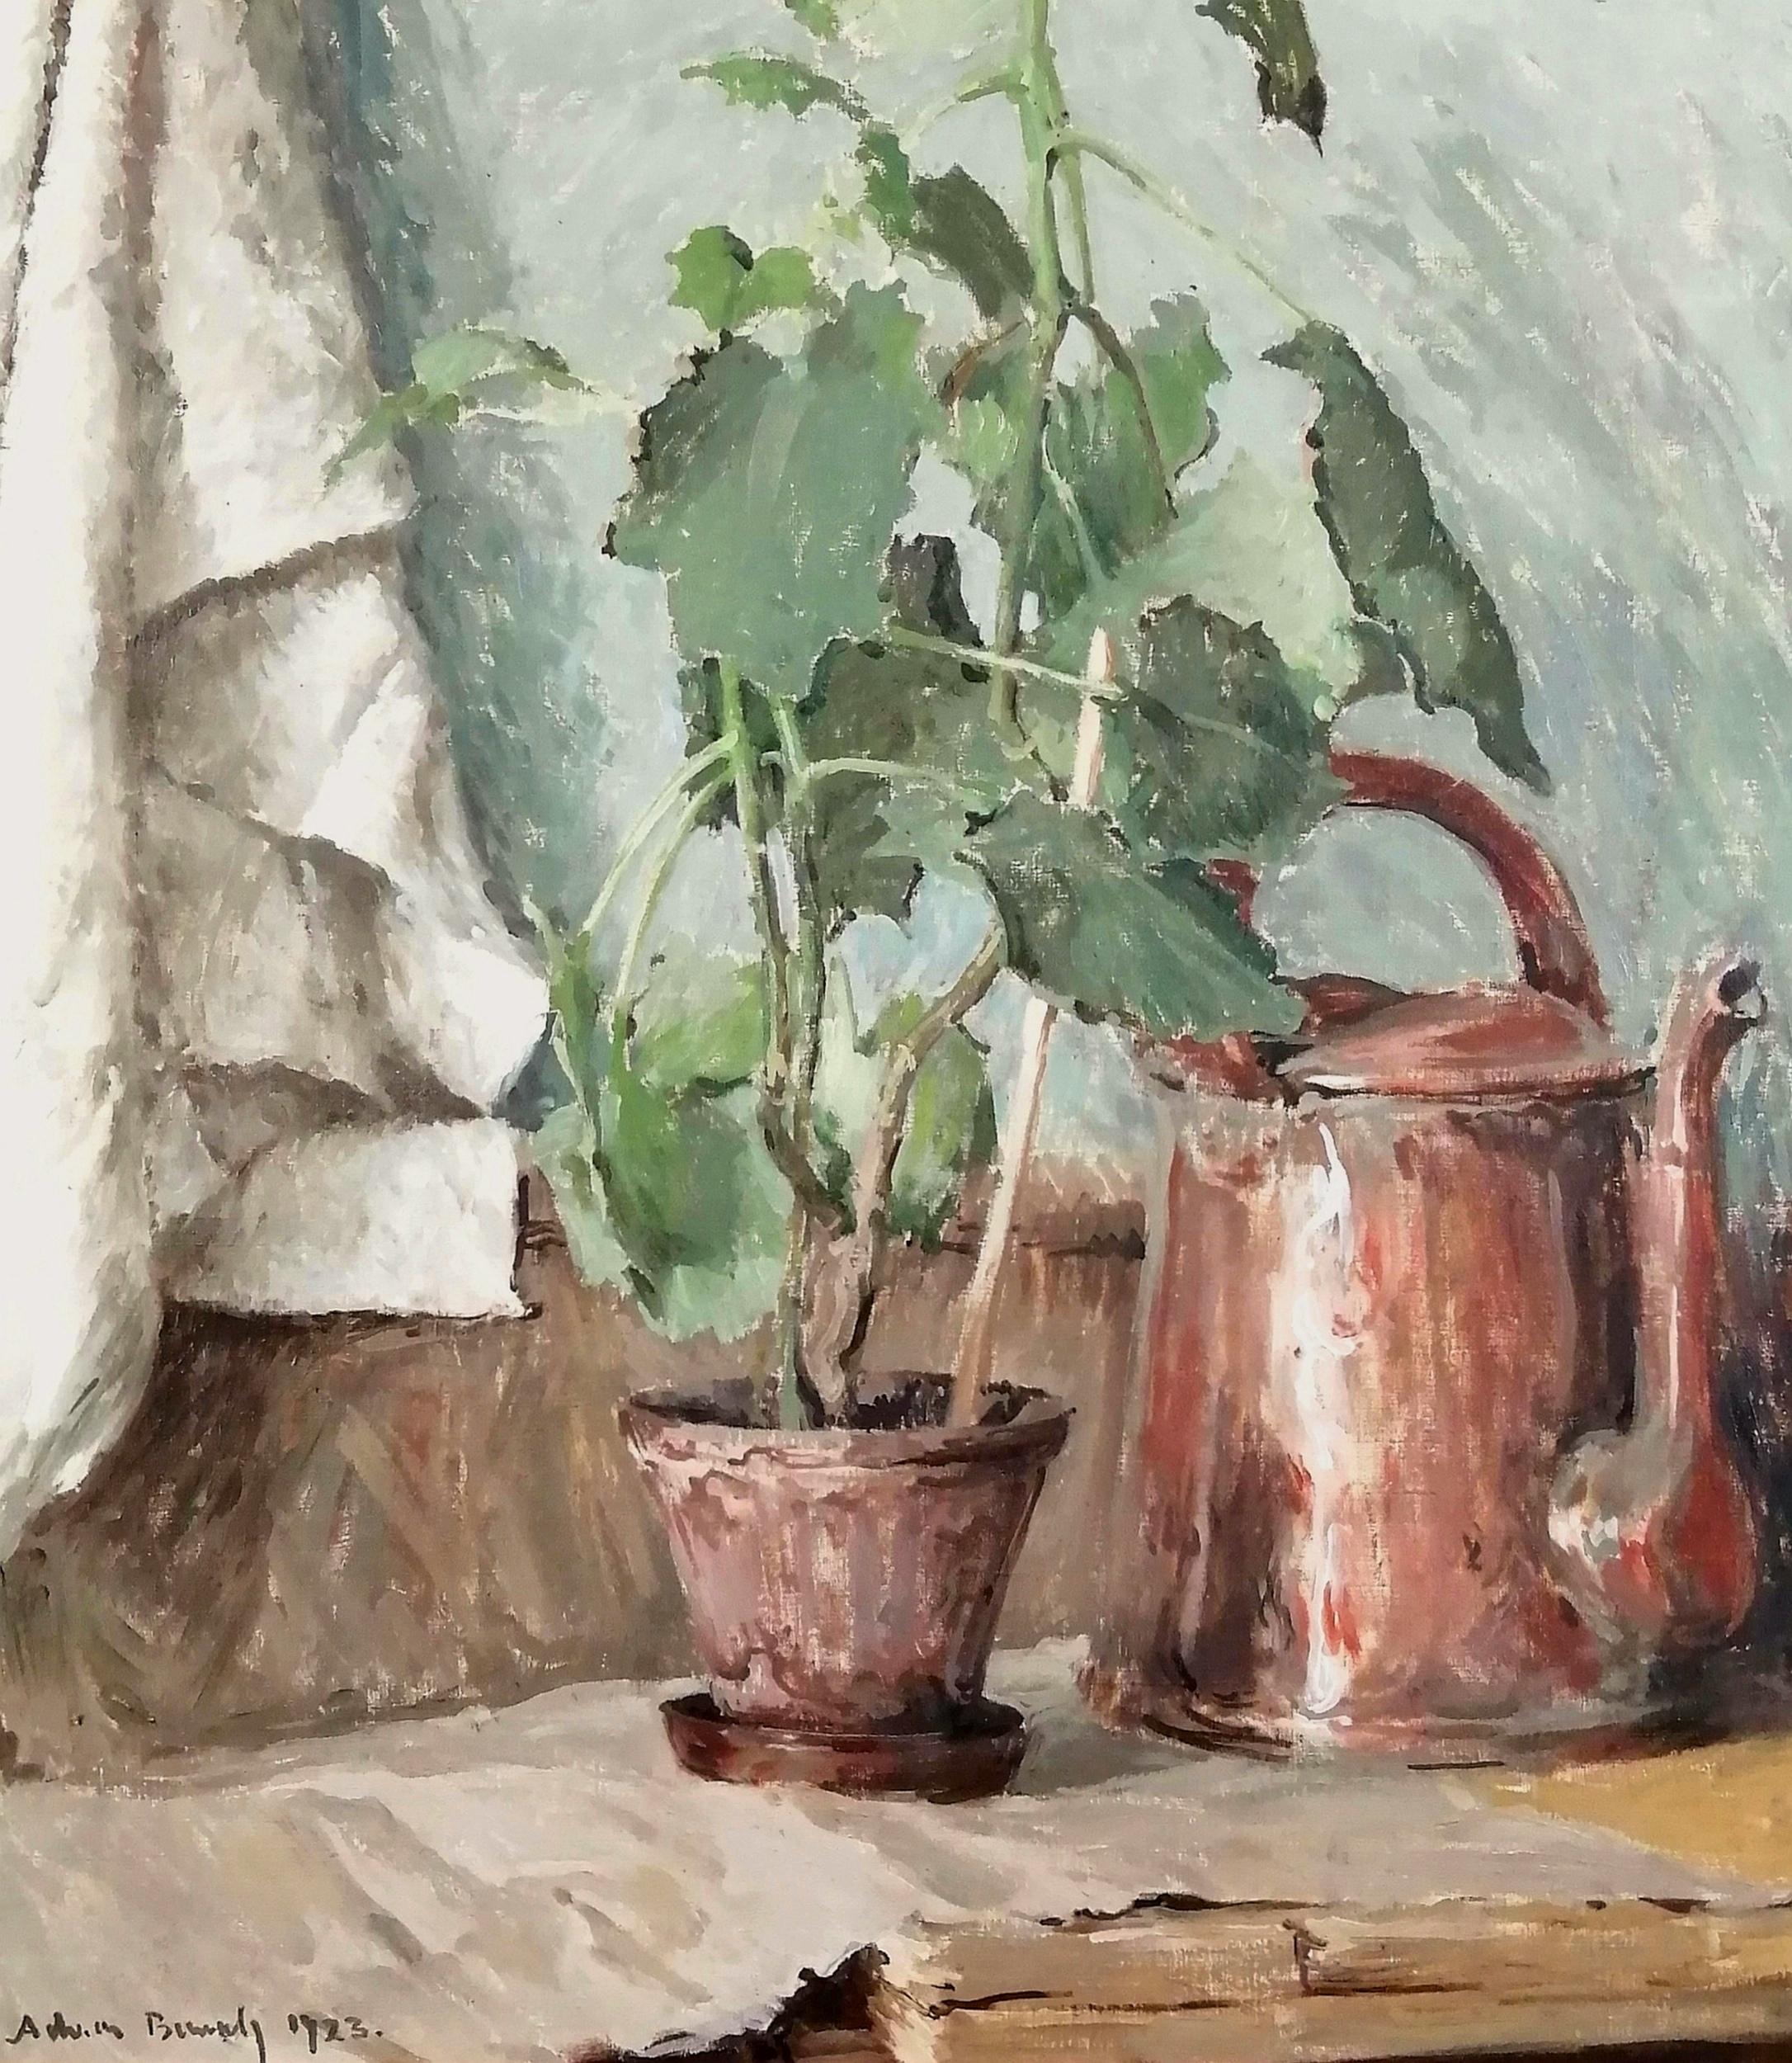 A very beautiful large French impressionist oil on canvas still life depicting a plant and brass kettle, probably in a kitchen. The work is very well painted and atmospheric on a generous scale. Signed and dated 1923 lower left.

Artist: French